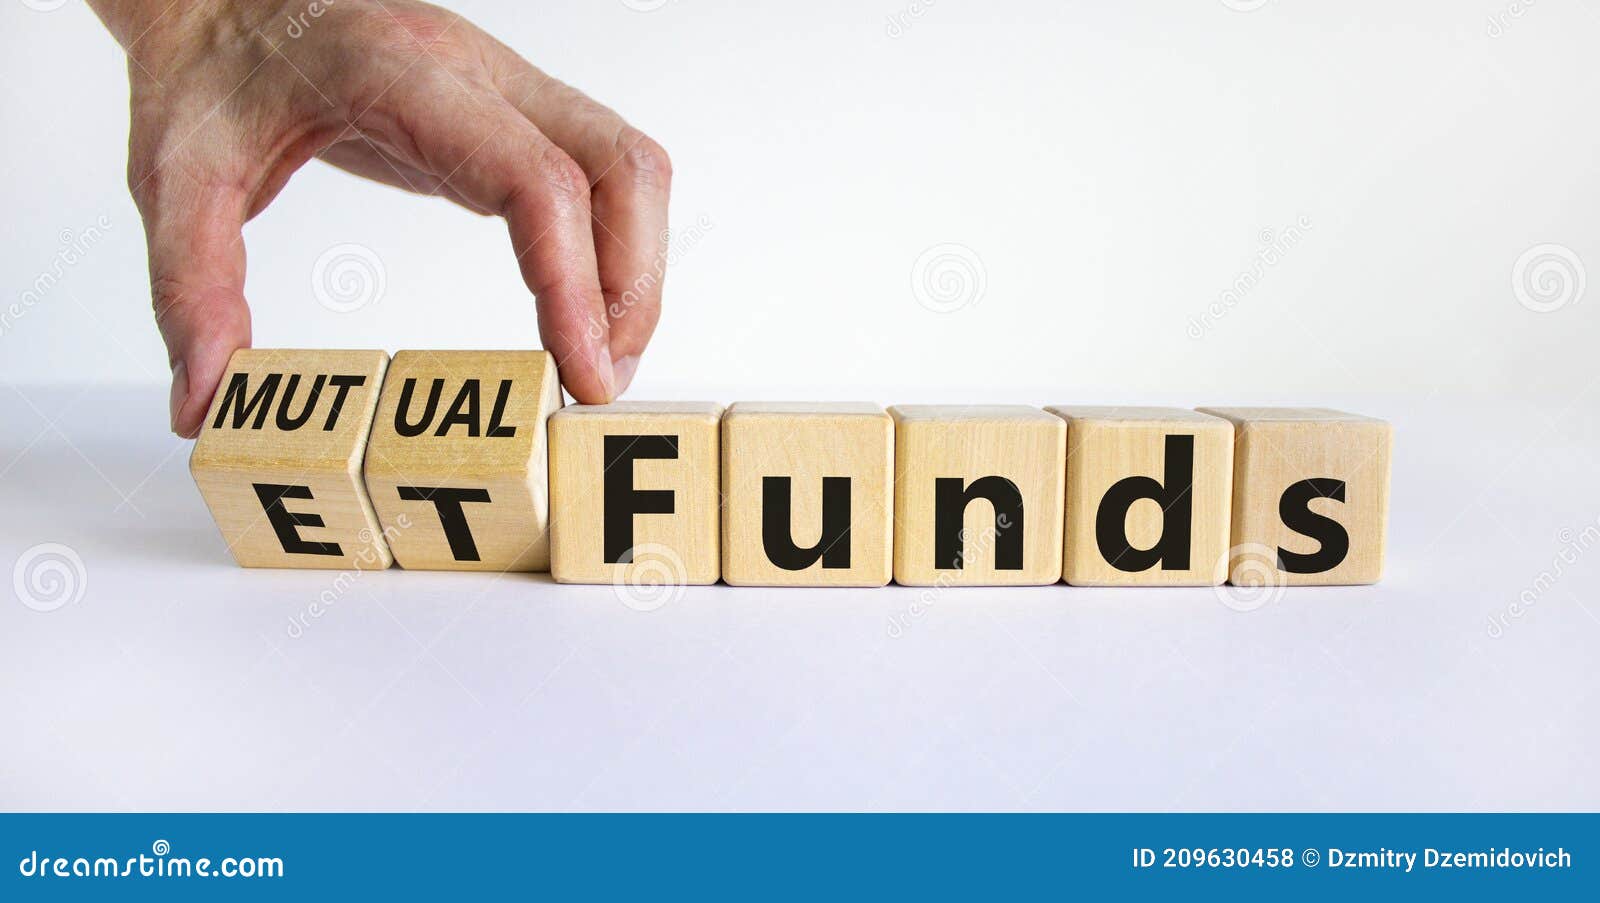 mutual funds vs etf . businessman turns a cube and changes words `etf, exchange-traded fund` to `mutual funds. beautiful